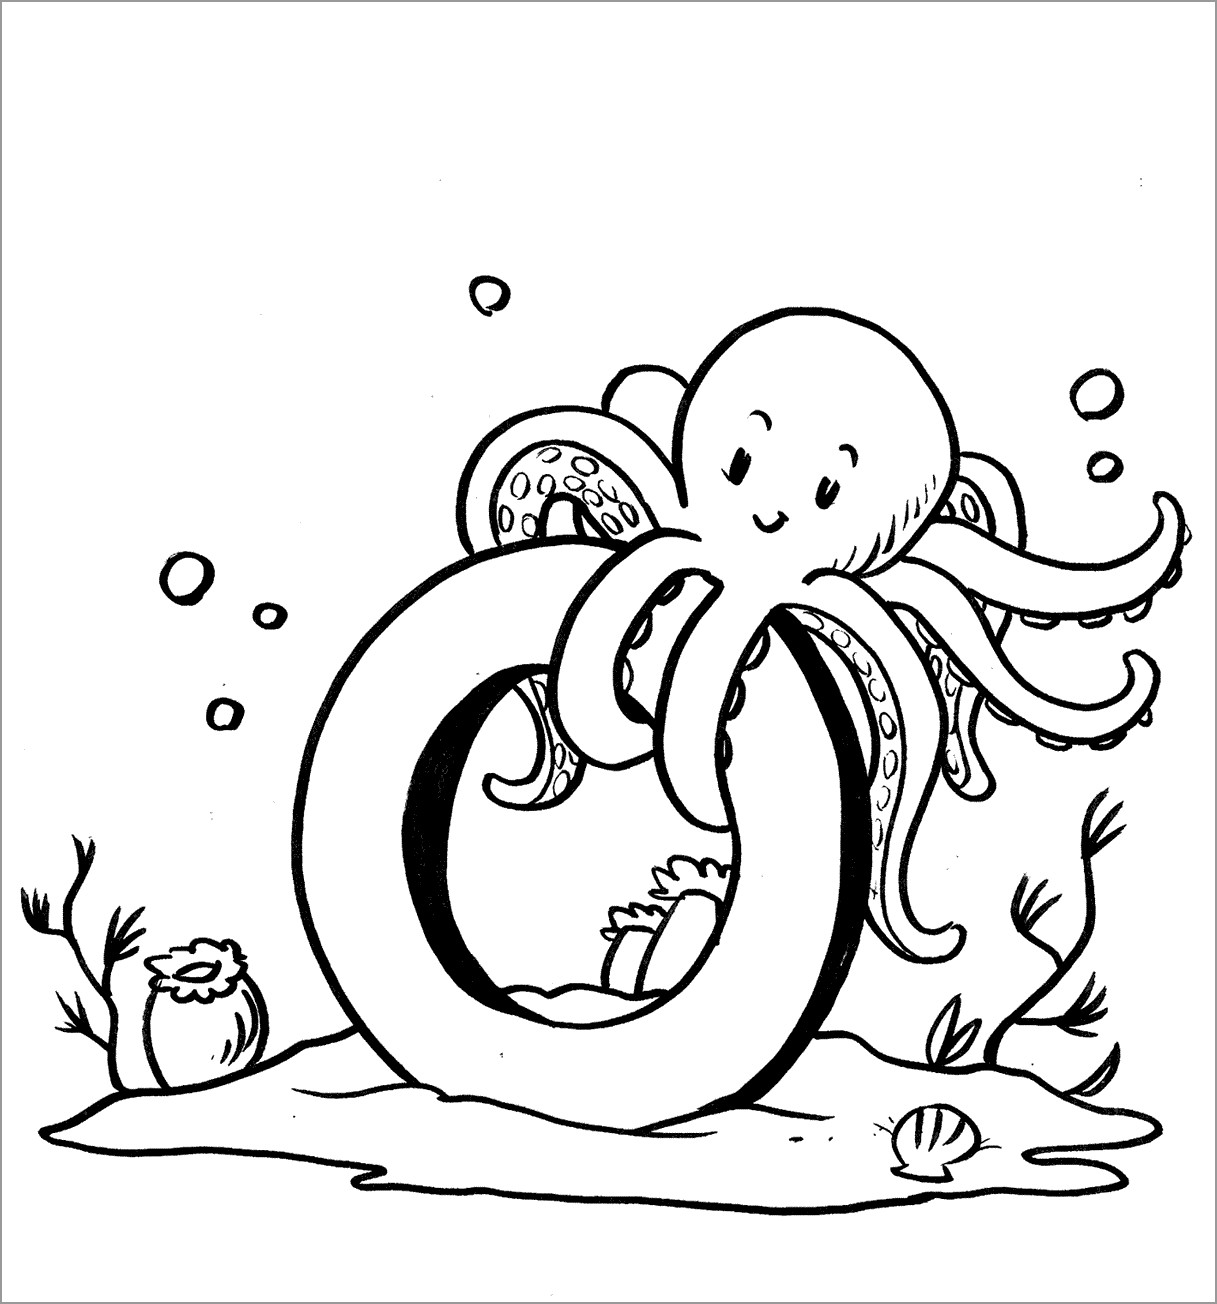 O For Octopus Coloring Page Coloringbay